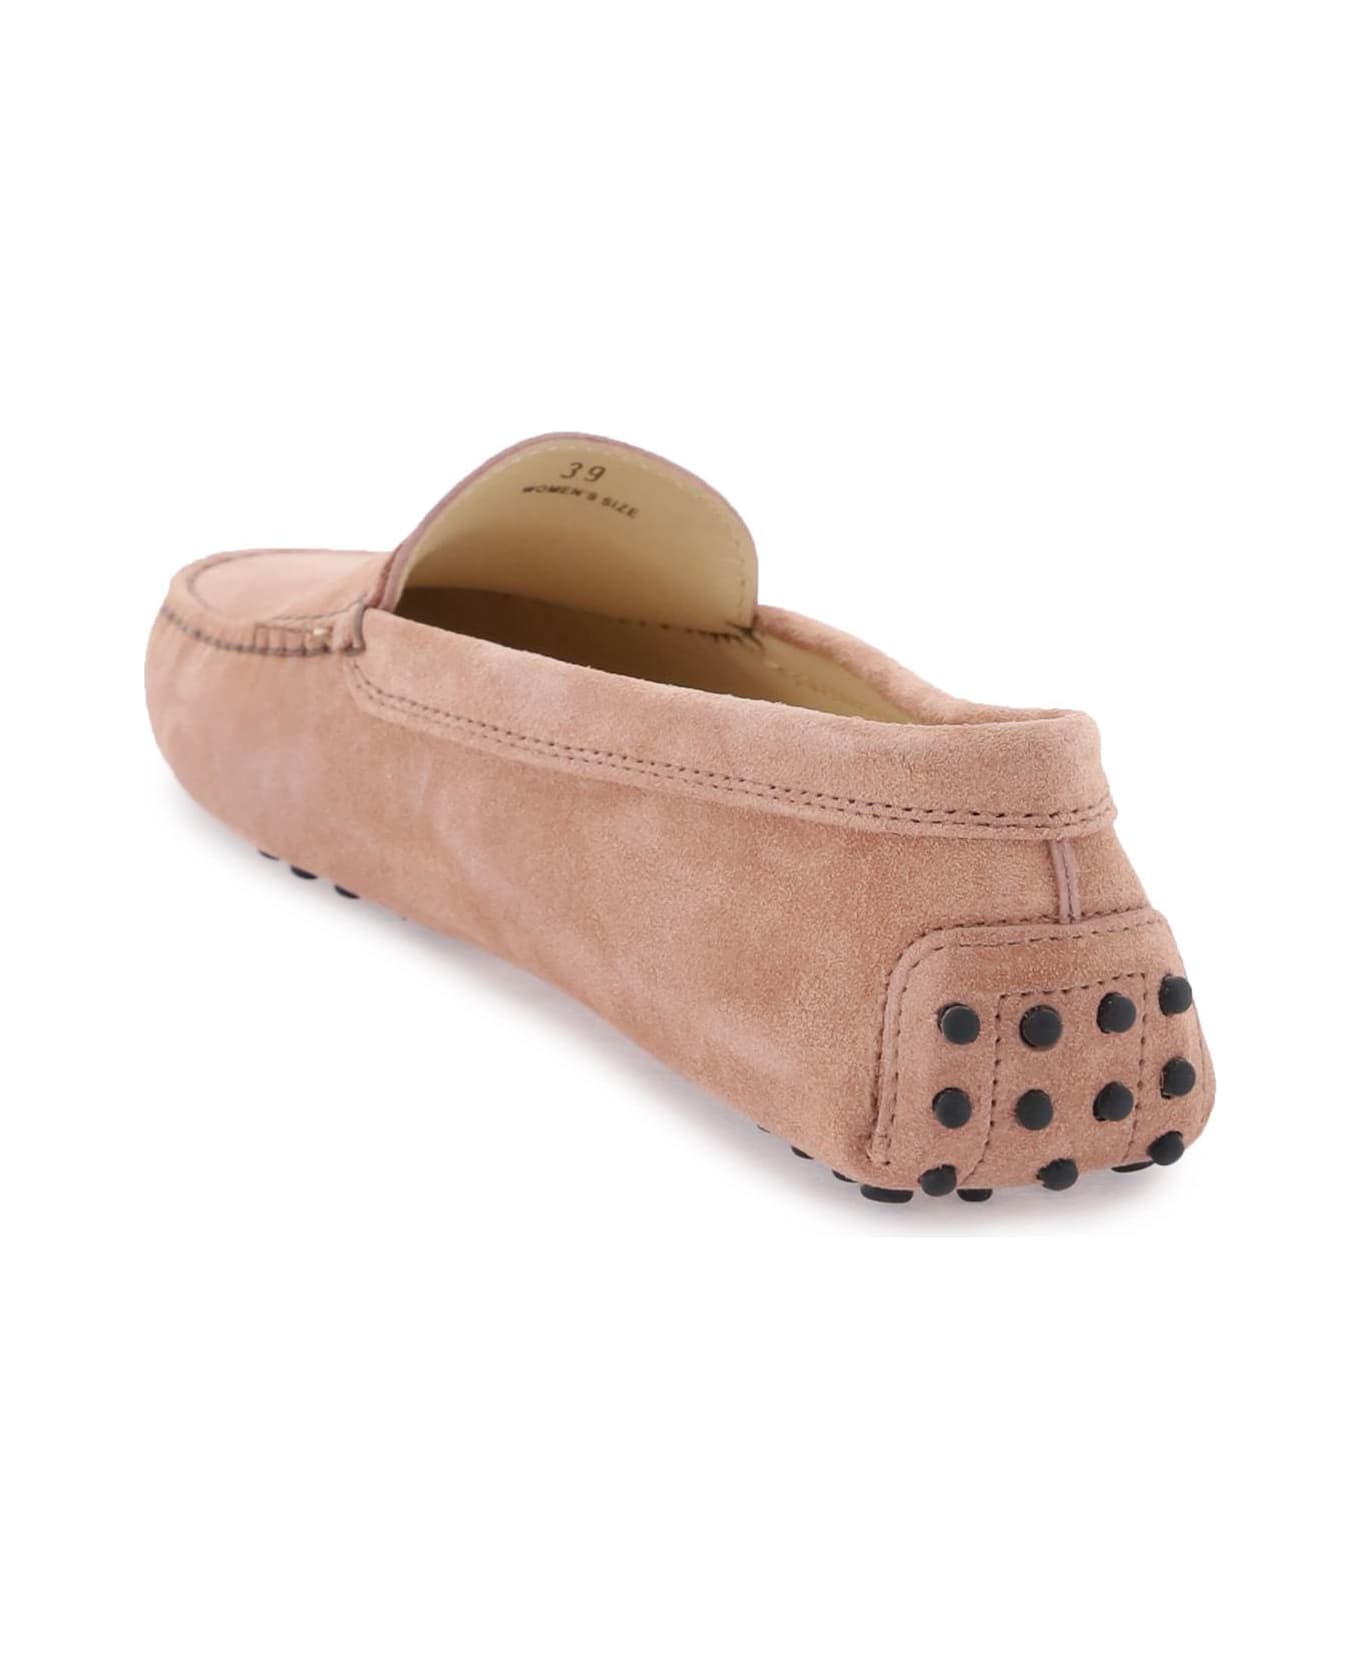 Tod's Gommino Loafers - COTTO CHIARO (Pink) フラットシューズ